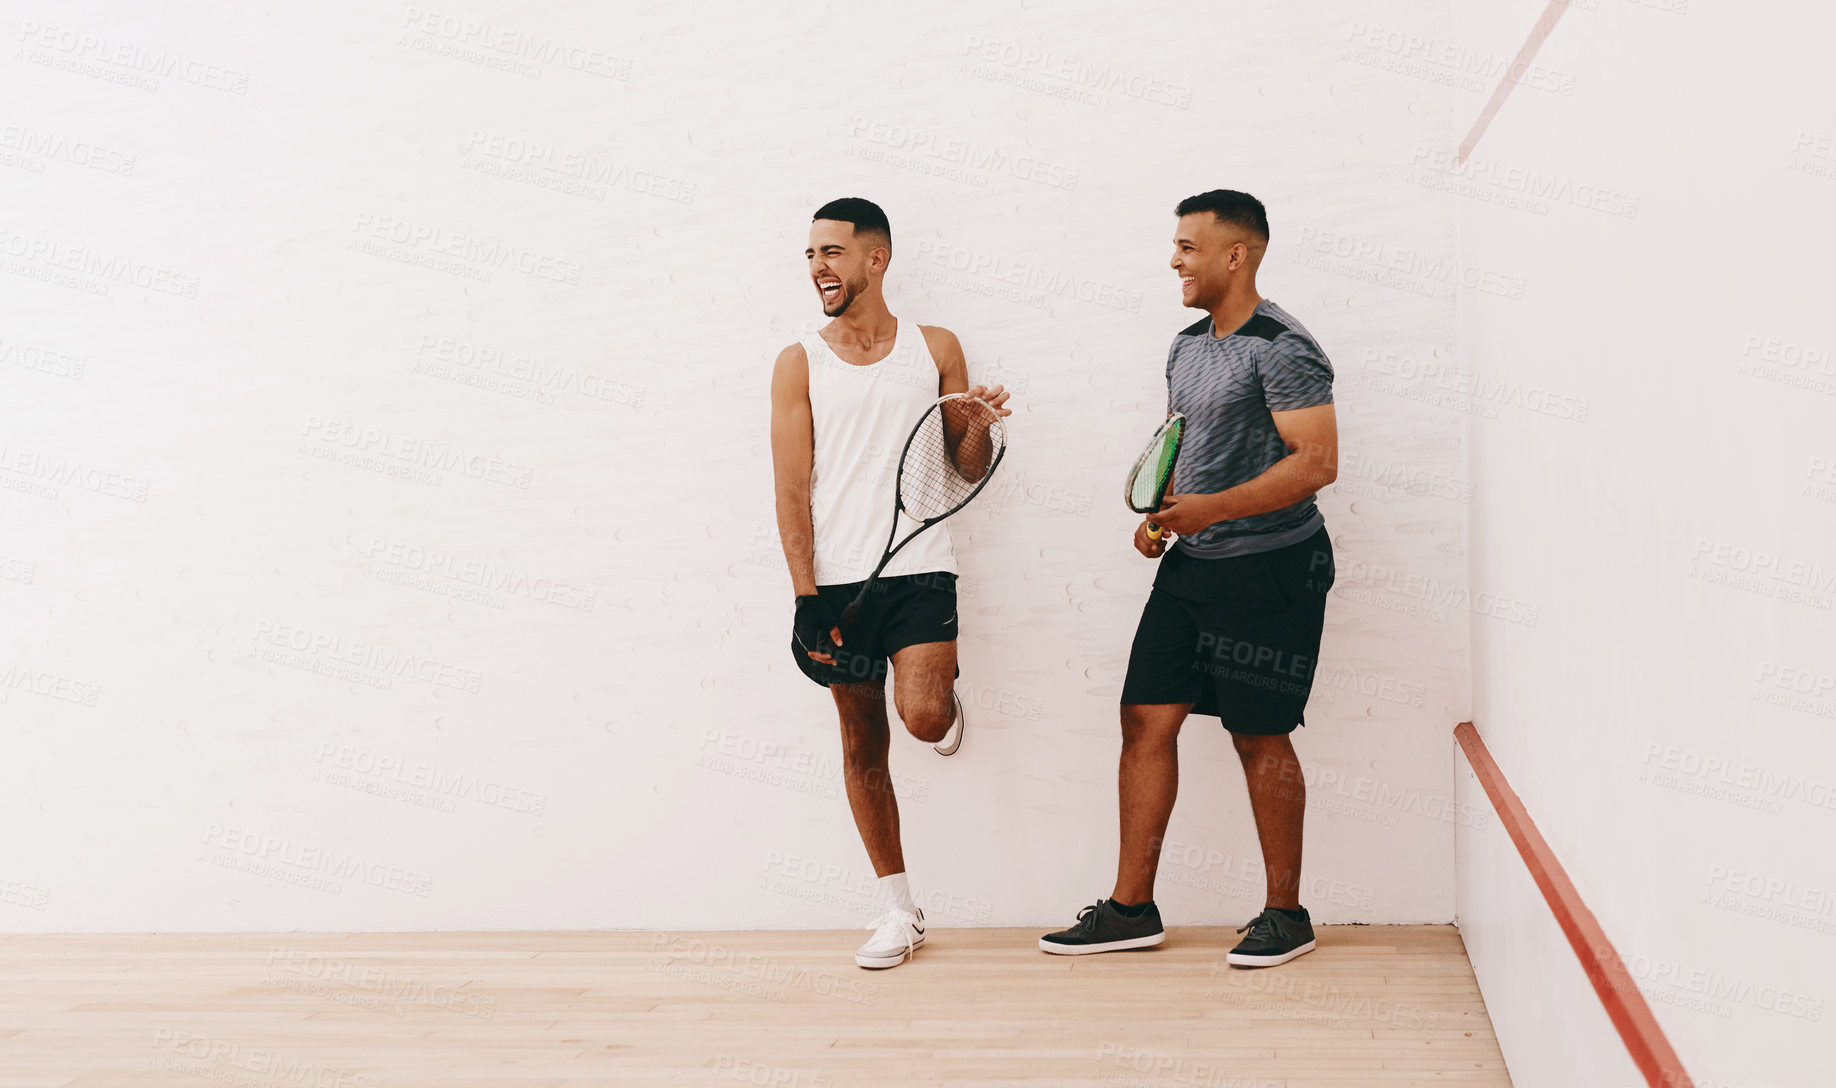 Buy stock photo Shot of two young men standing together on a squash court